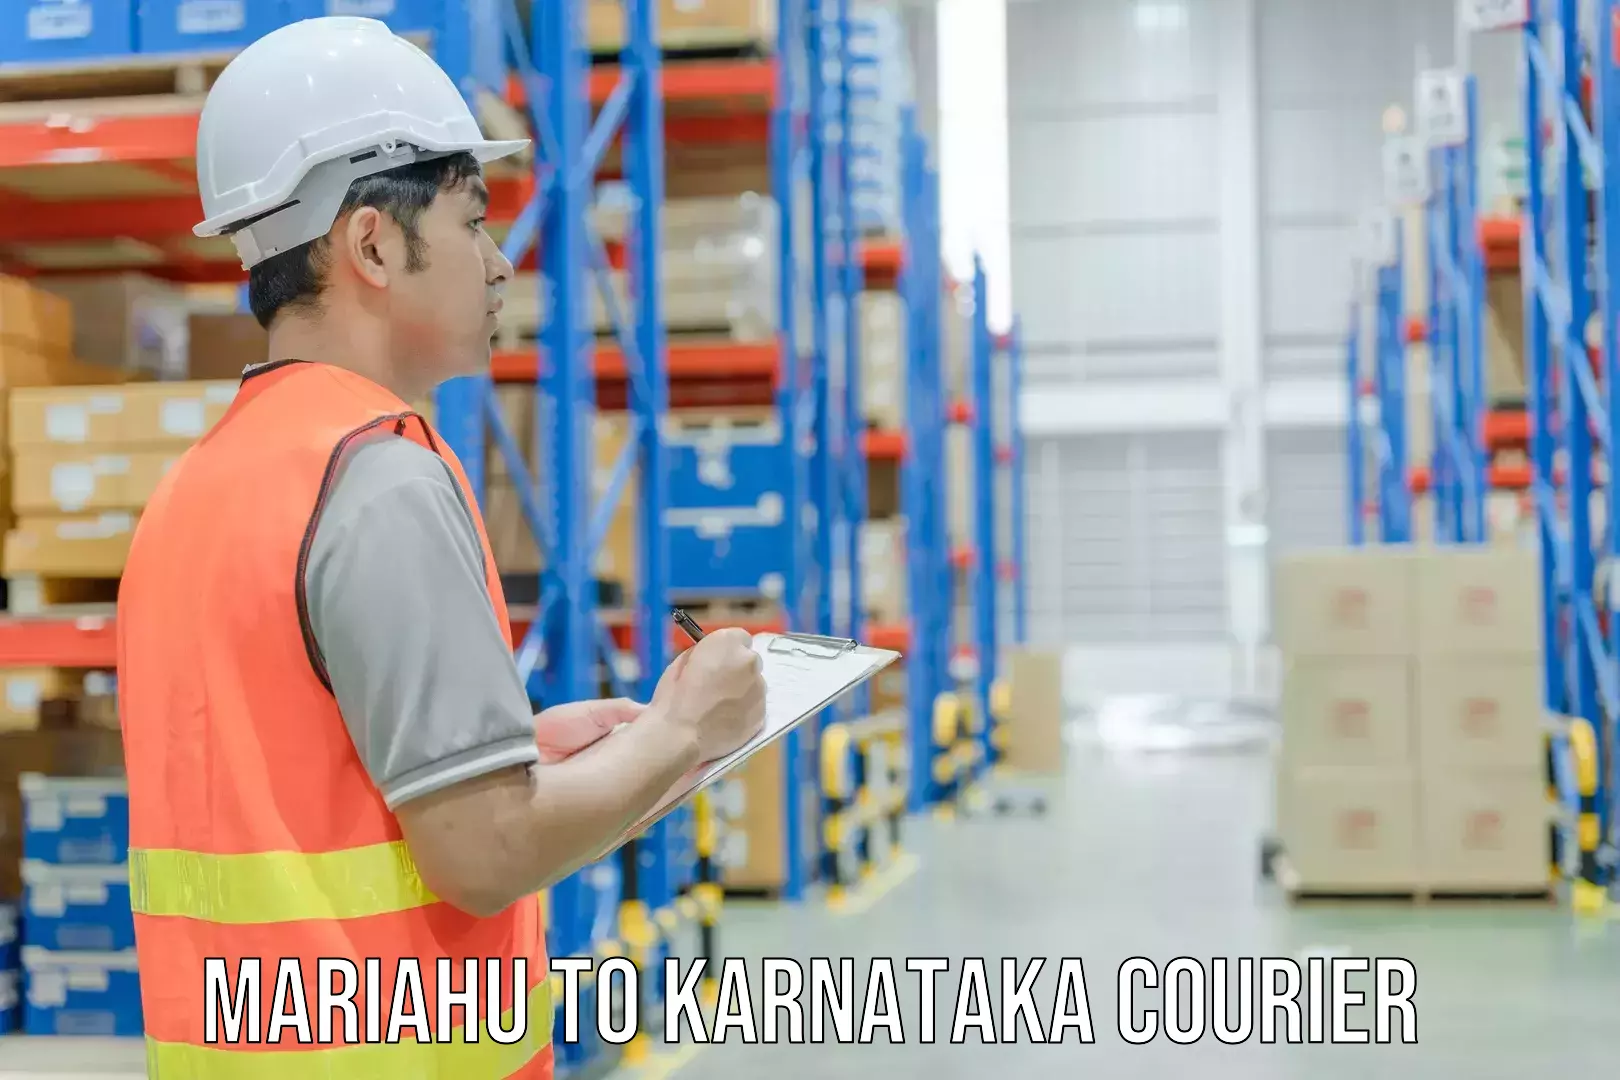 Next-day delivery options in Mariahu to Karnataka